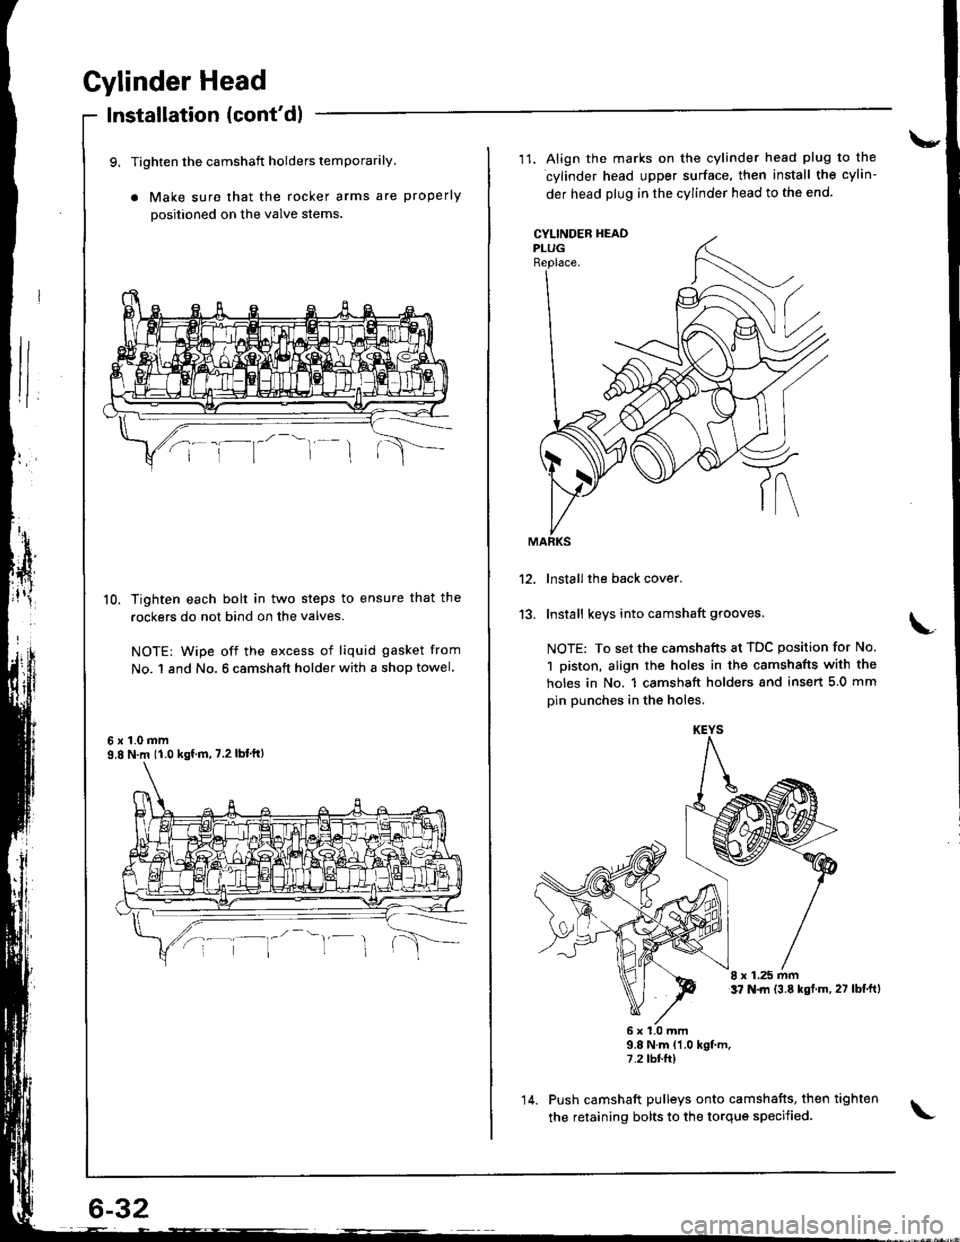 HONDA INTEGRA 1998 4.G Workshop Manual Cylinder Head
Installation (contdl
9, Tighten the camshaft holders temporarily.
a Make sure that the rocker arms are properly
positioned on the valve stems
10. Tighten each bolt in two steps to ensur